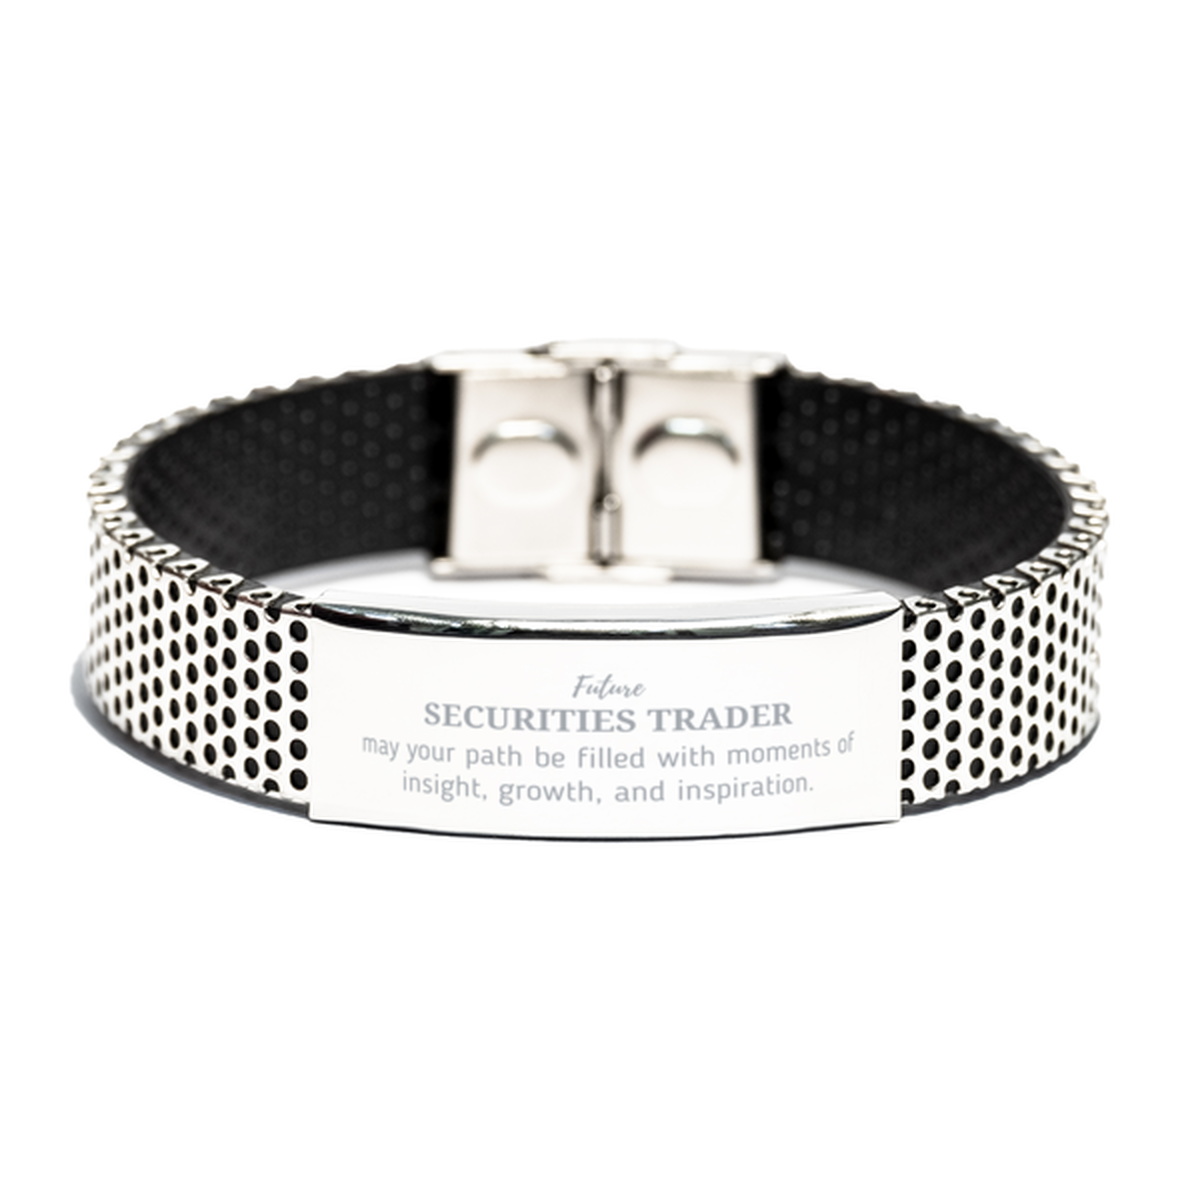 Future Securities Trader Gifts, May your path be filled with moments of insight, Graduation Gifts for New Securities Trader, Christmas Unique Stainless Steel Bracelet For Men, Women, Friends